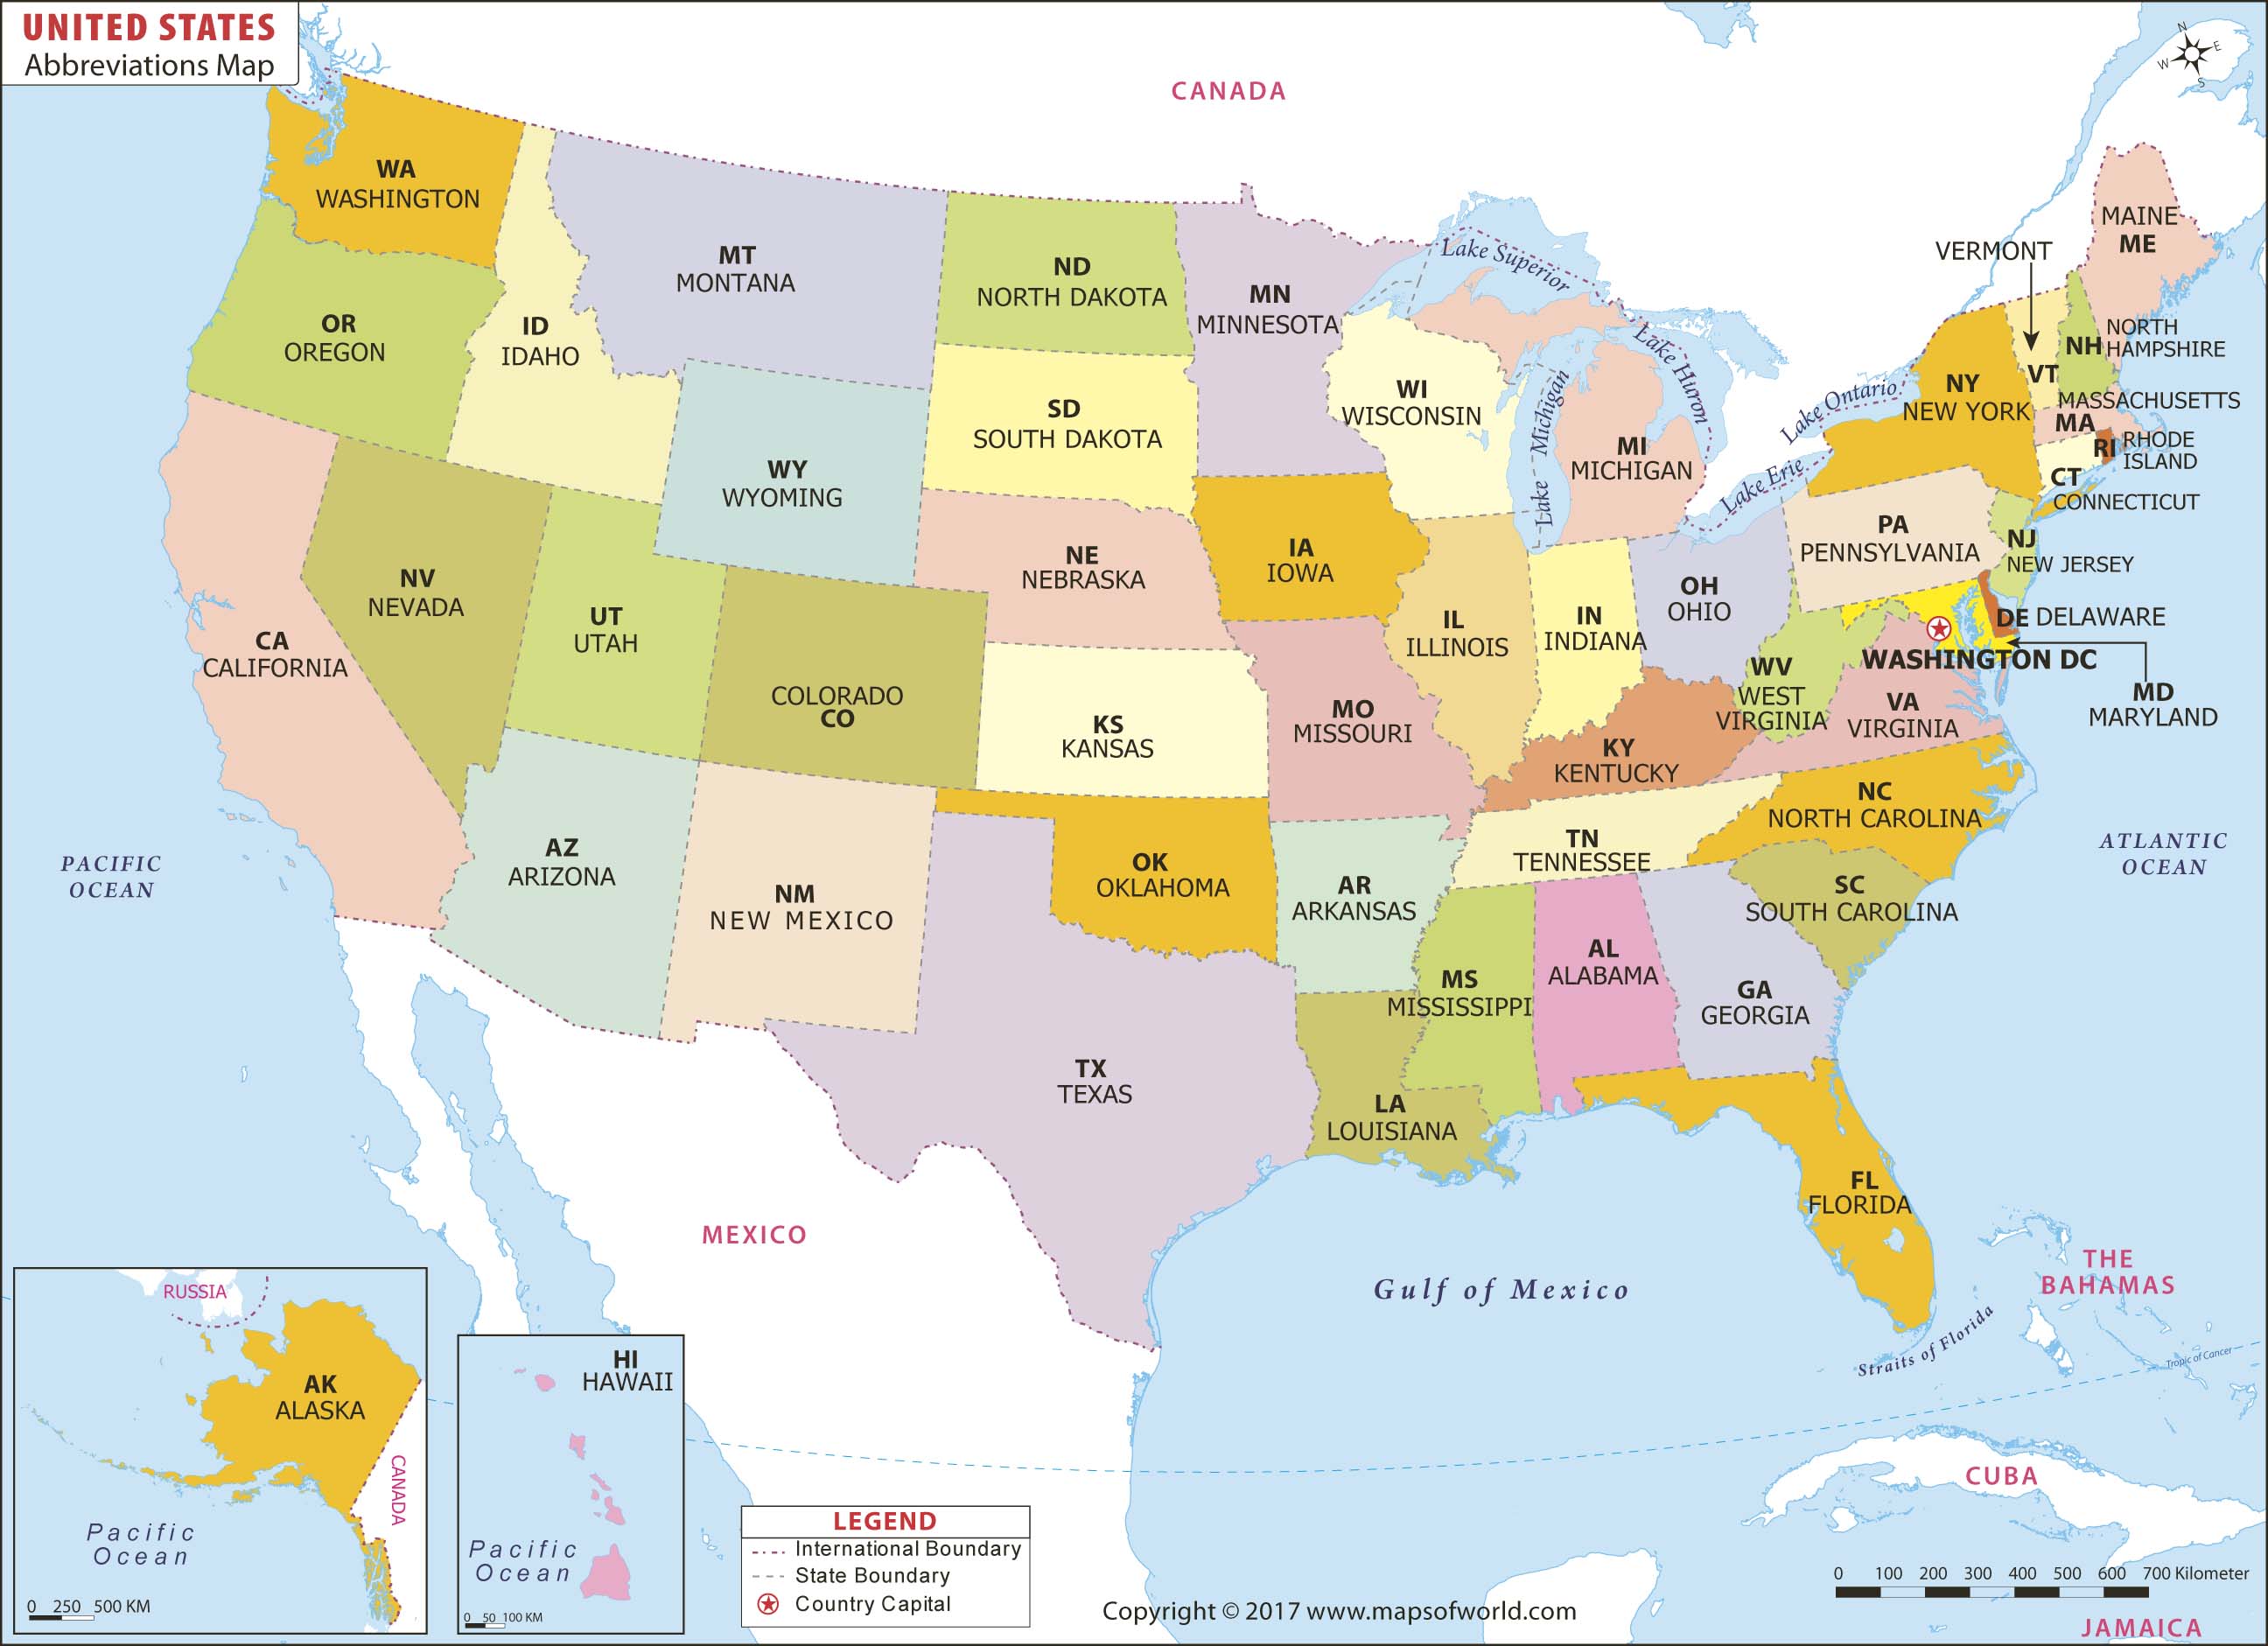 united-states-abbreviations-wall-map-by-maps-of-world-mapsales